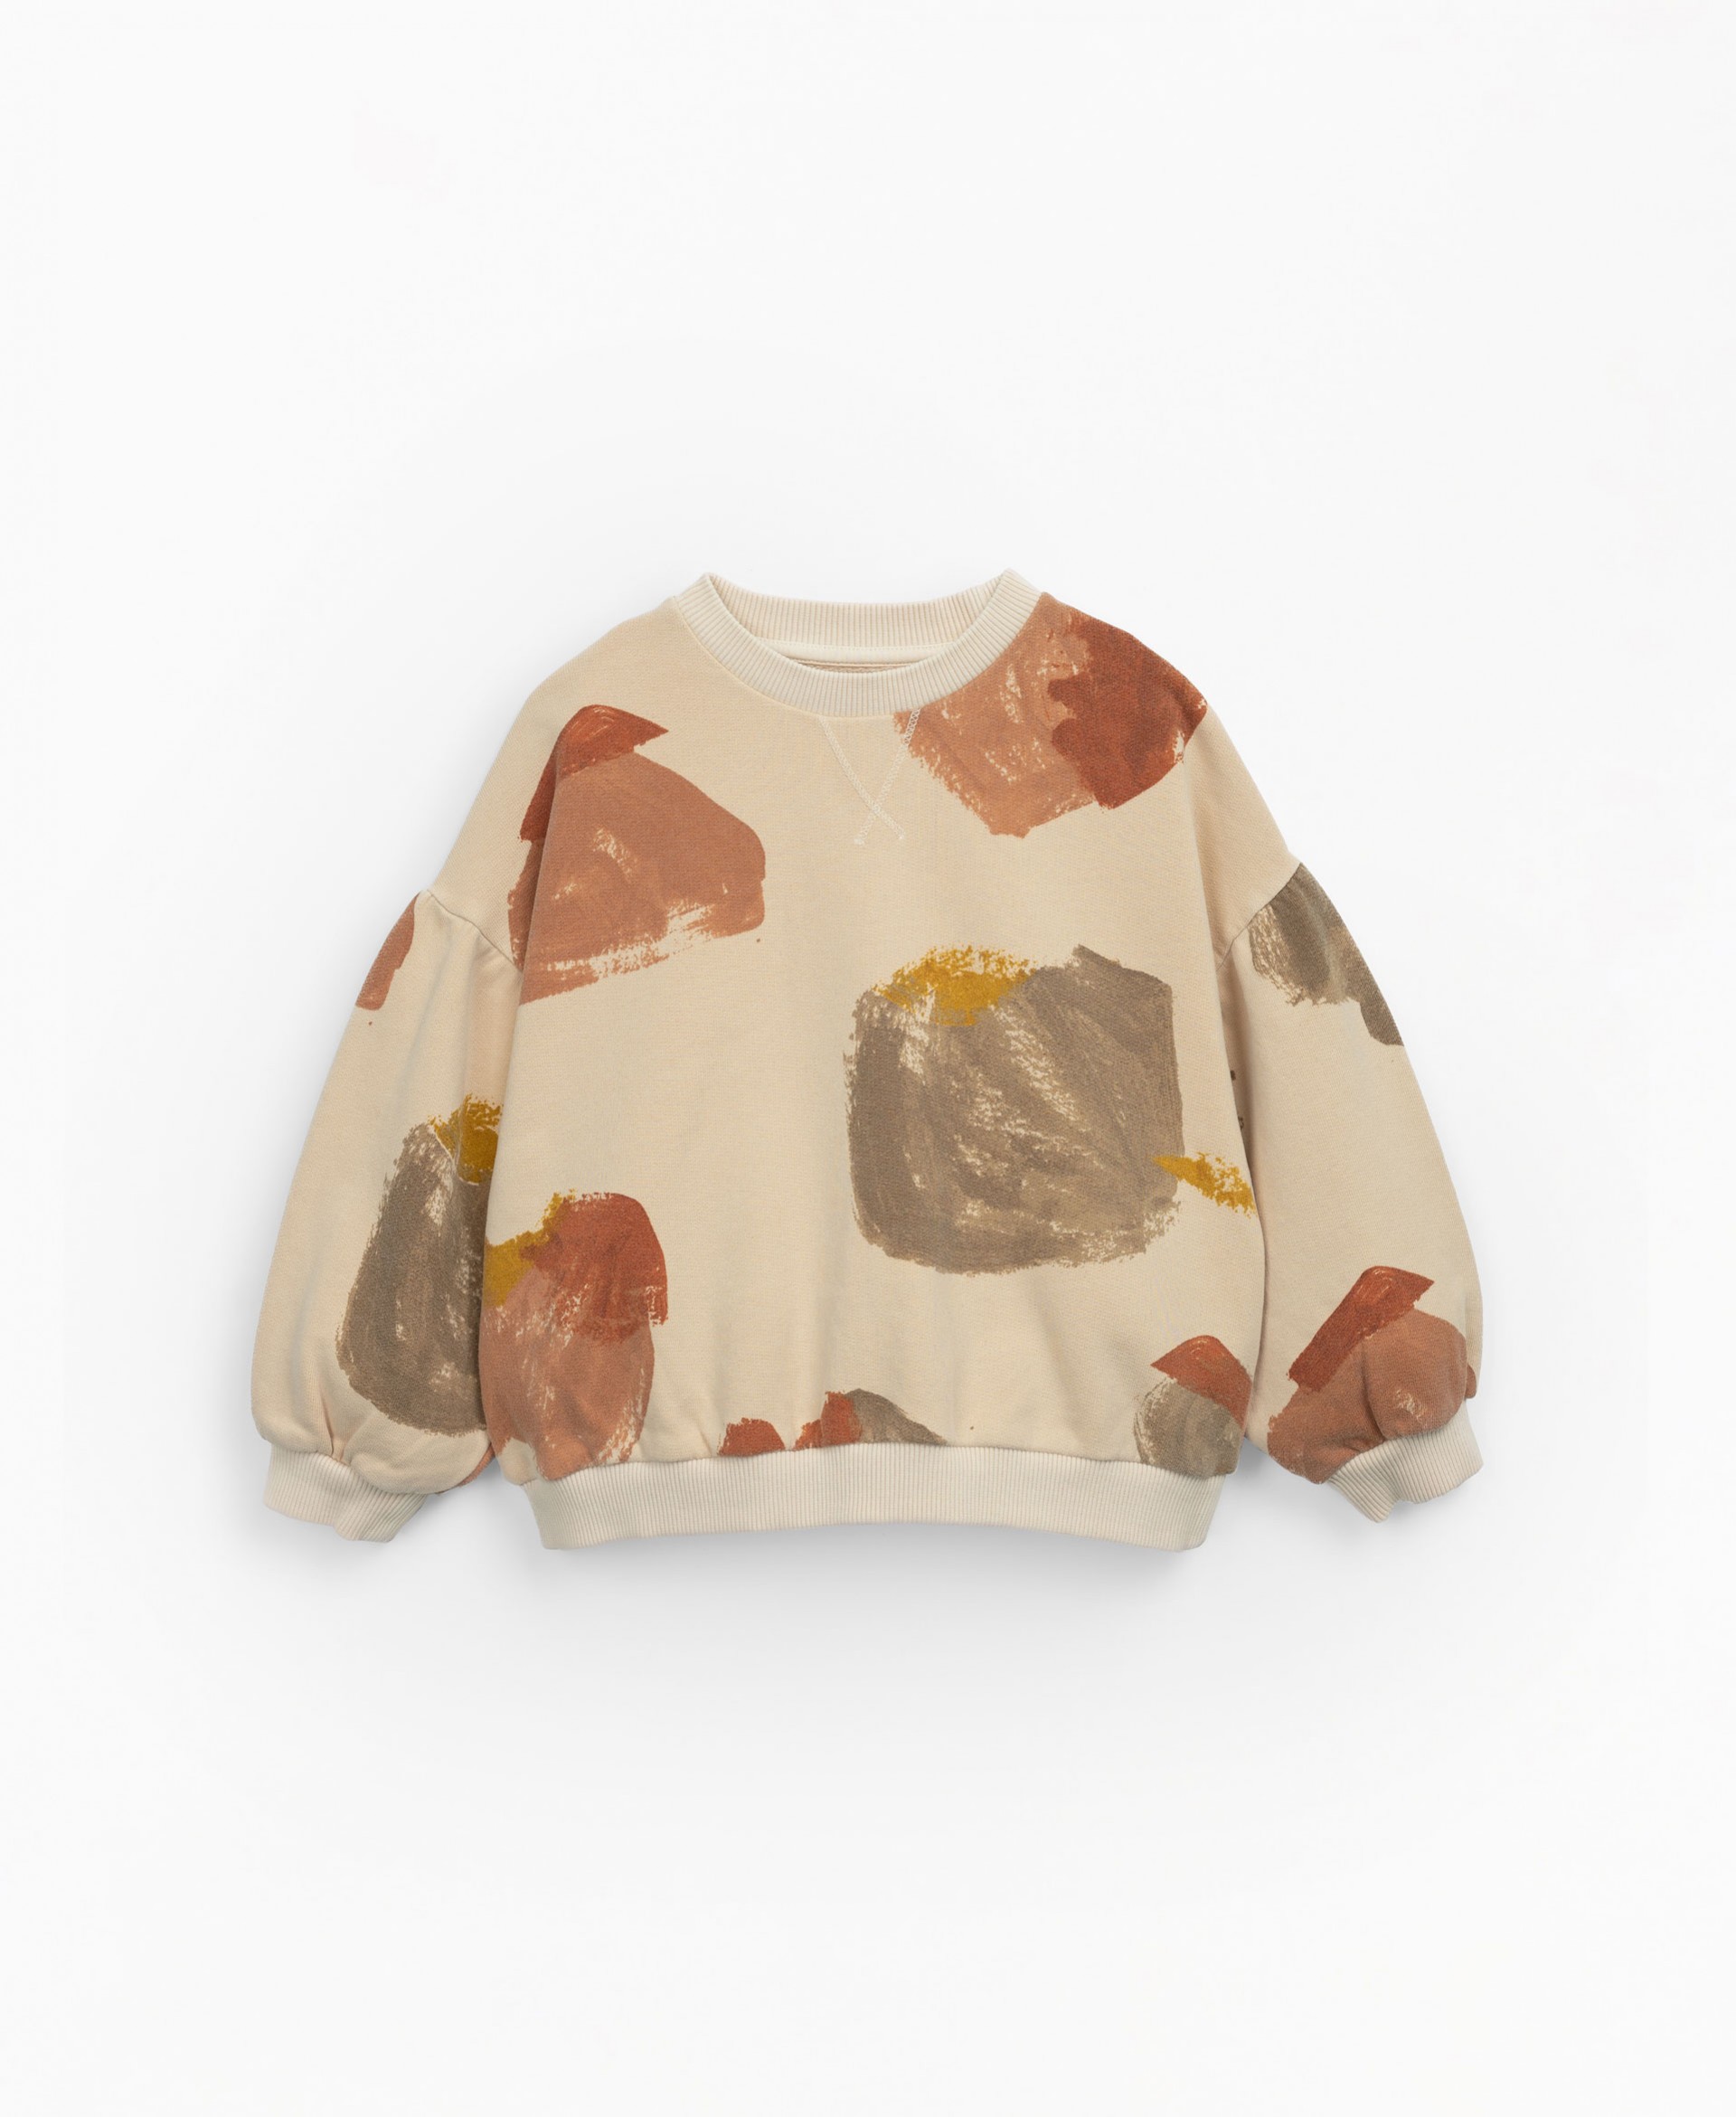 Naturally dyed printed jersey | Mother Lcia